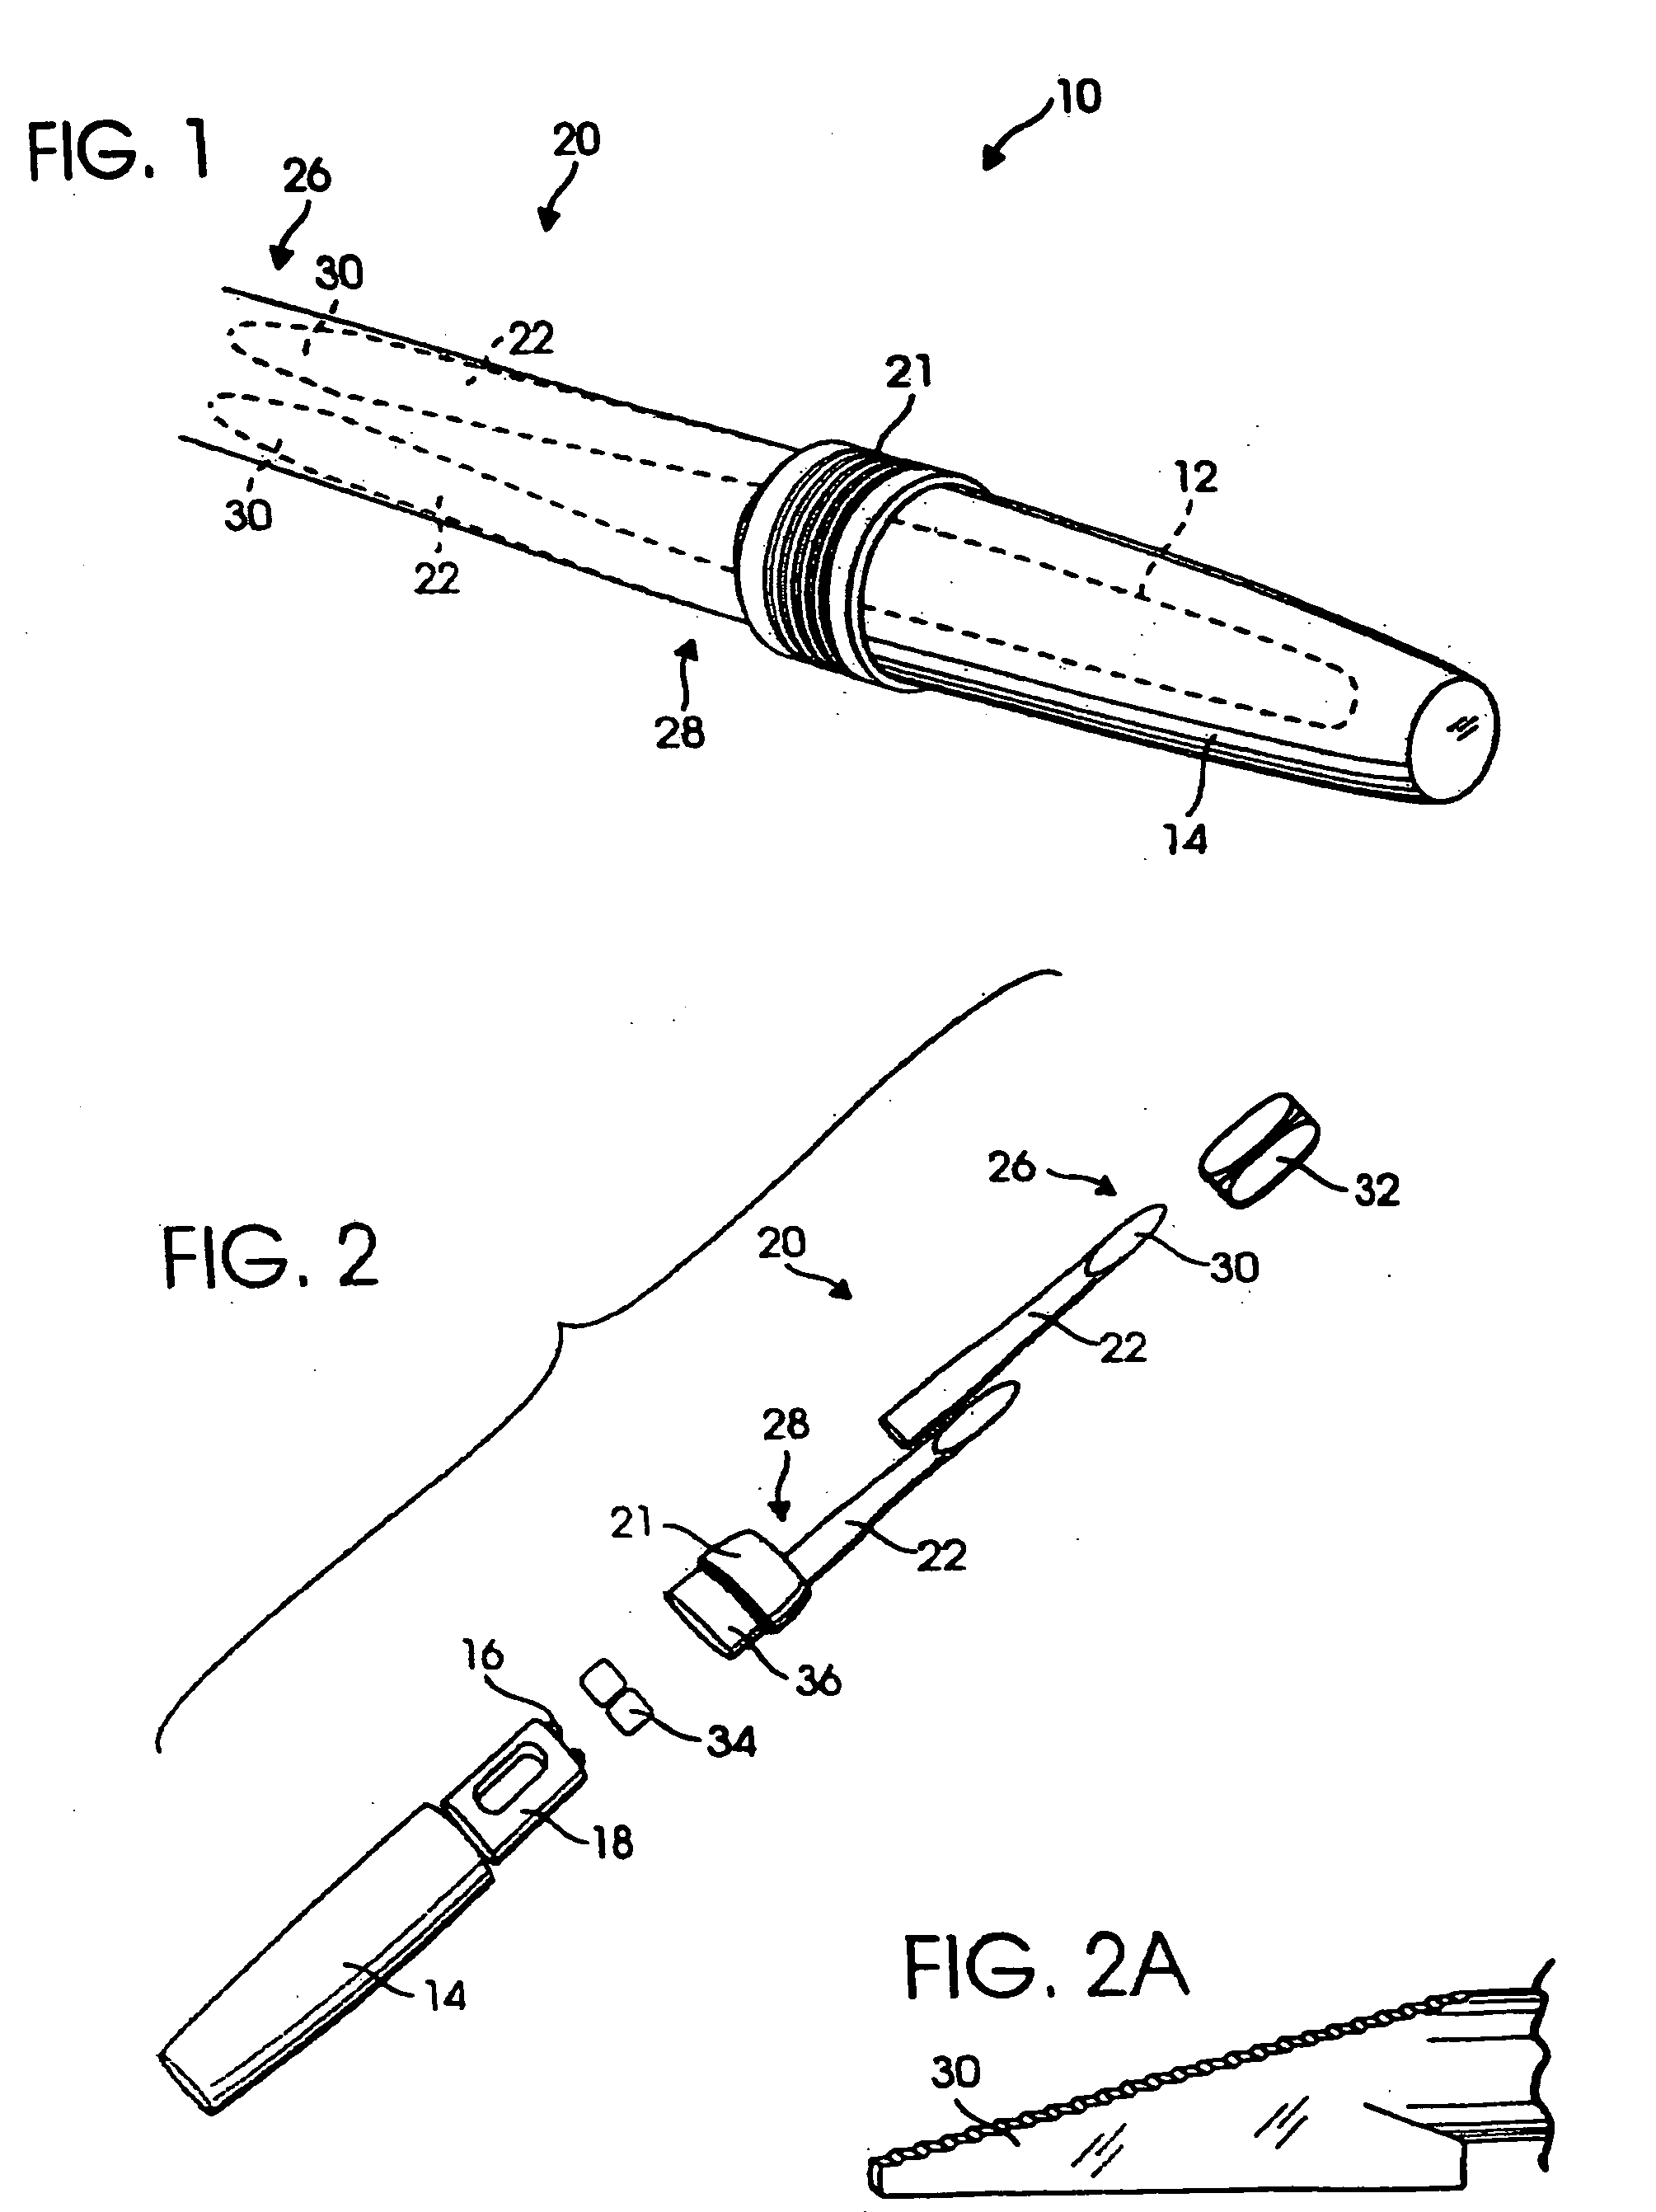 Method and device for improving oral health